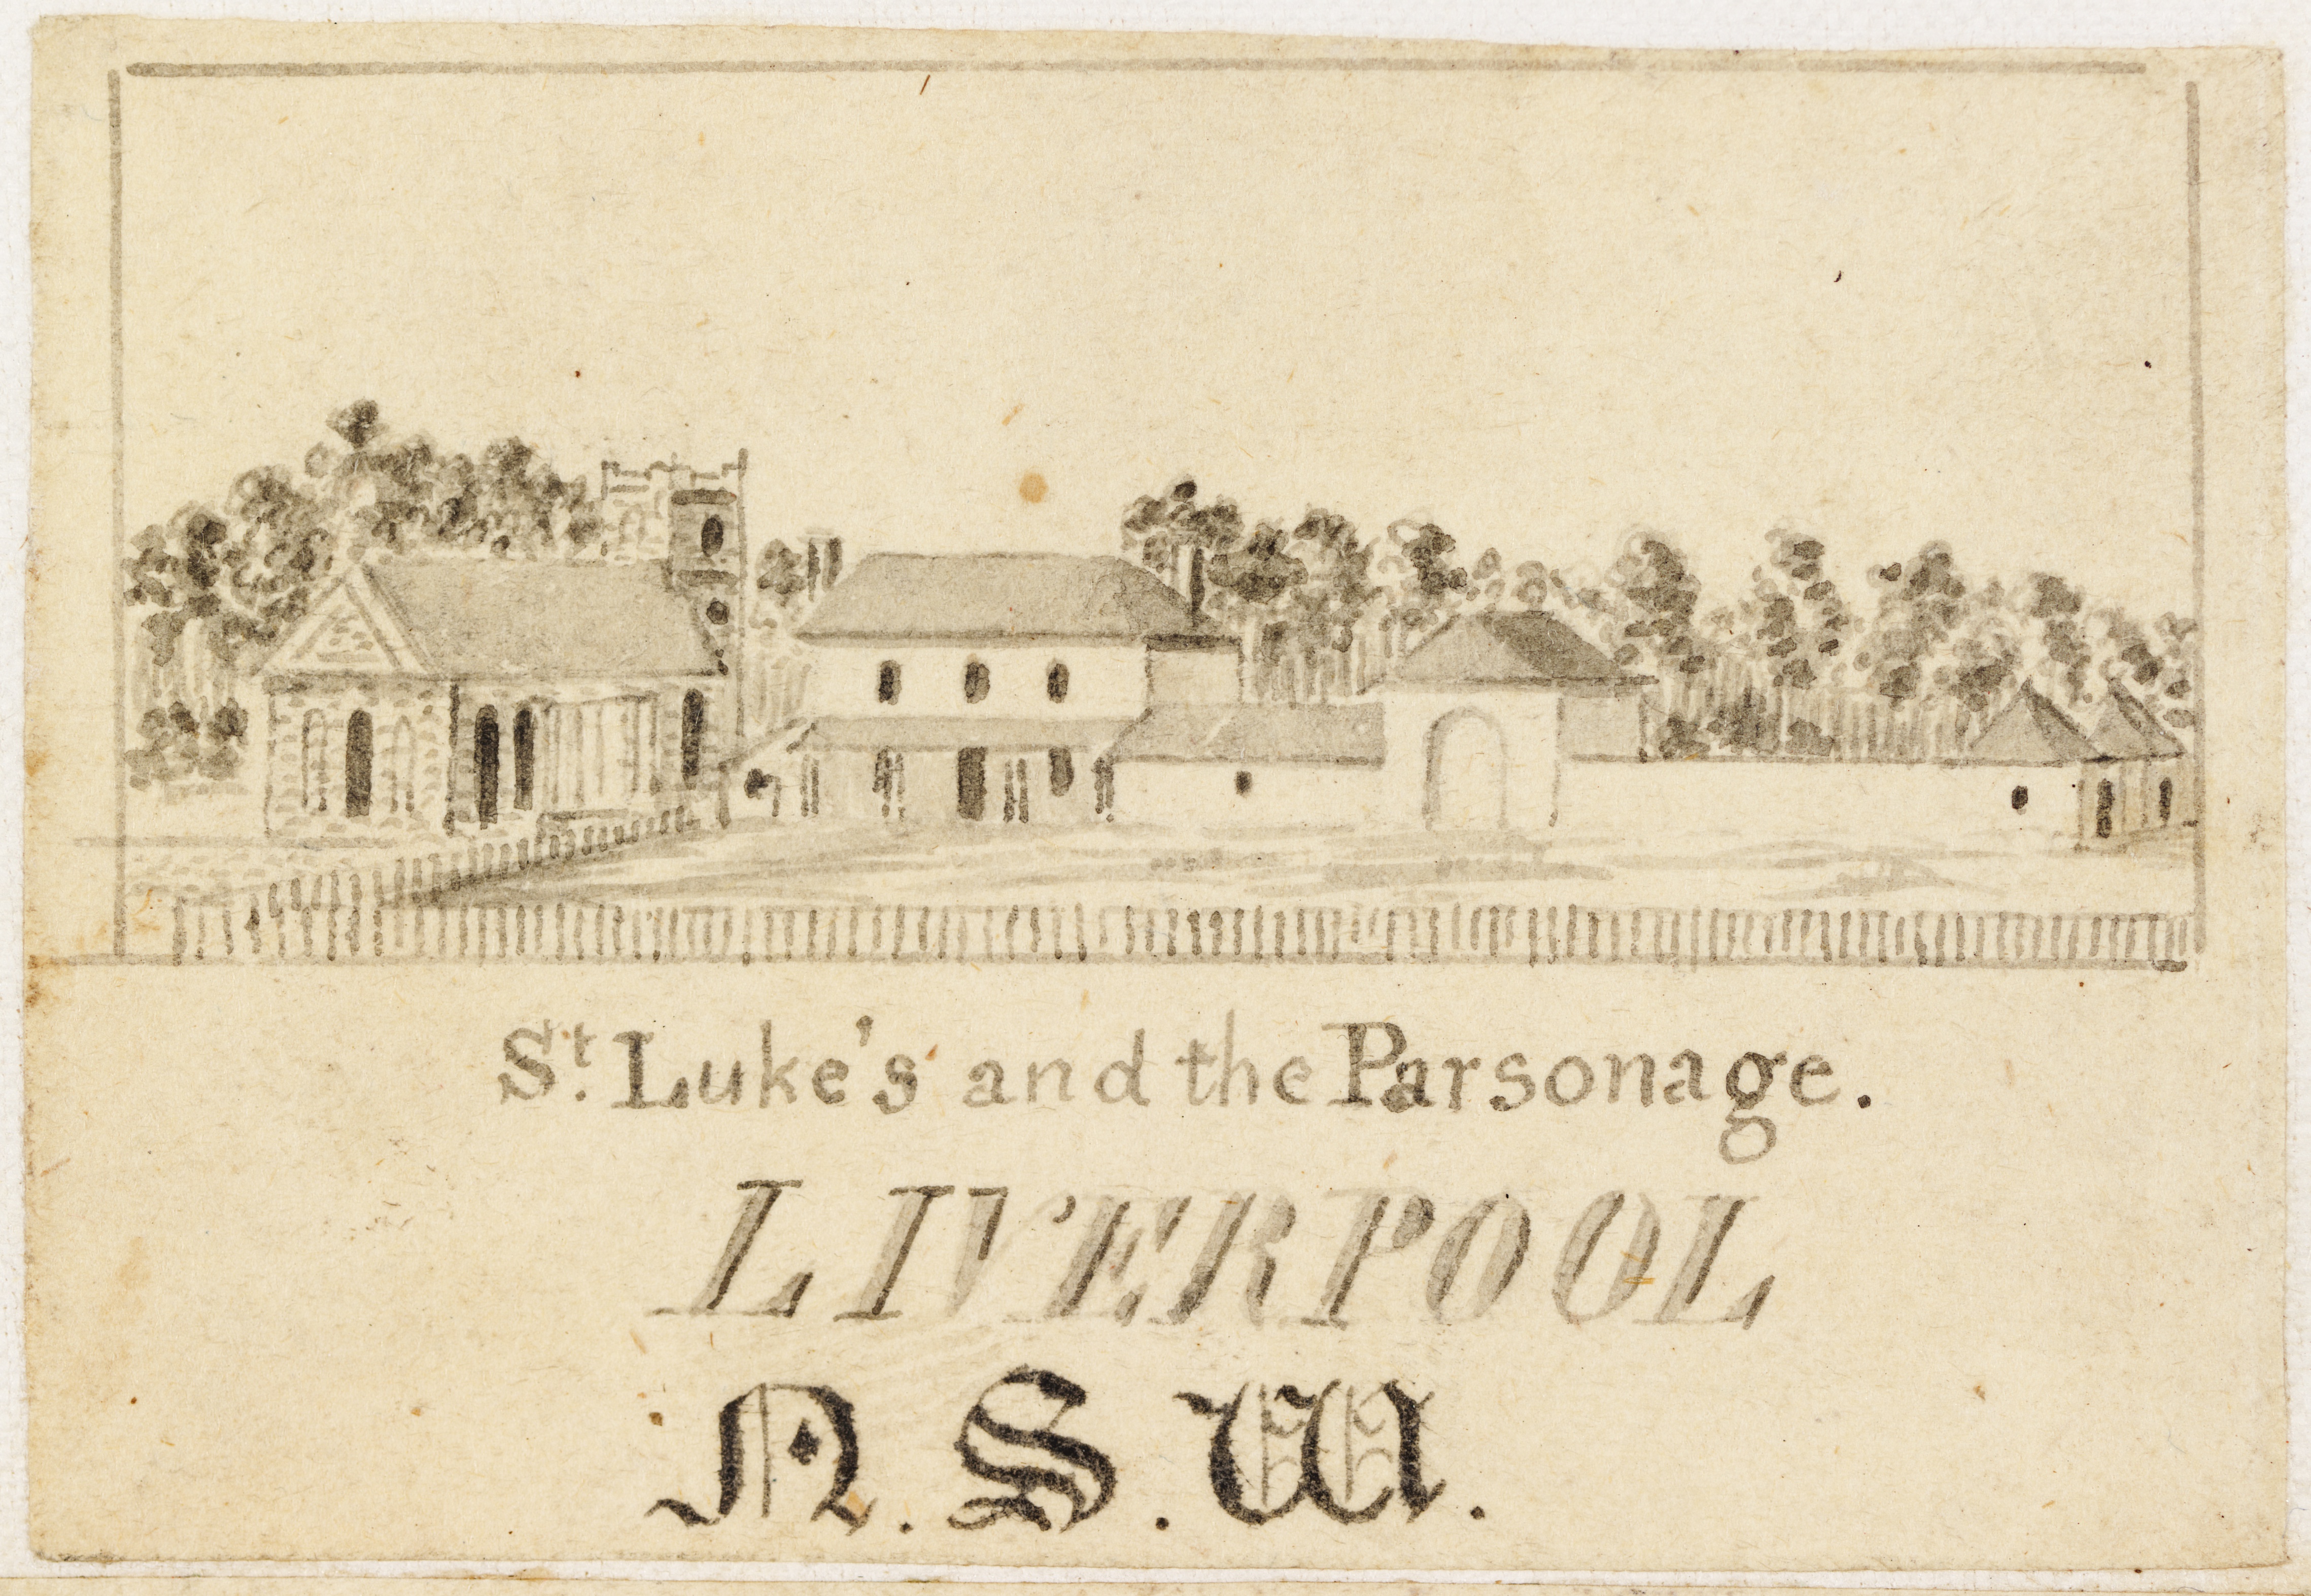 St. Luke's and the Parsonage, Liverpool, N.S.W, from, Views of Sydney and Surrounding District by Edward Mason